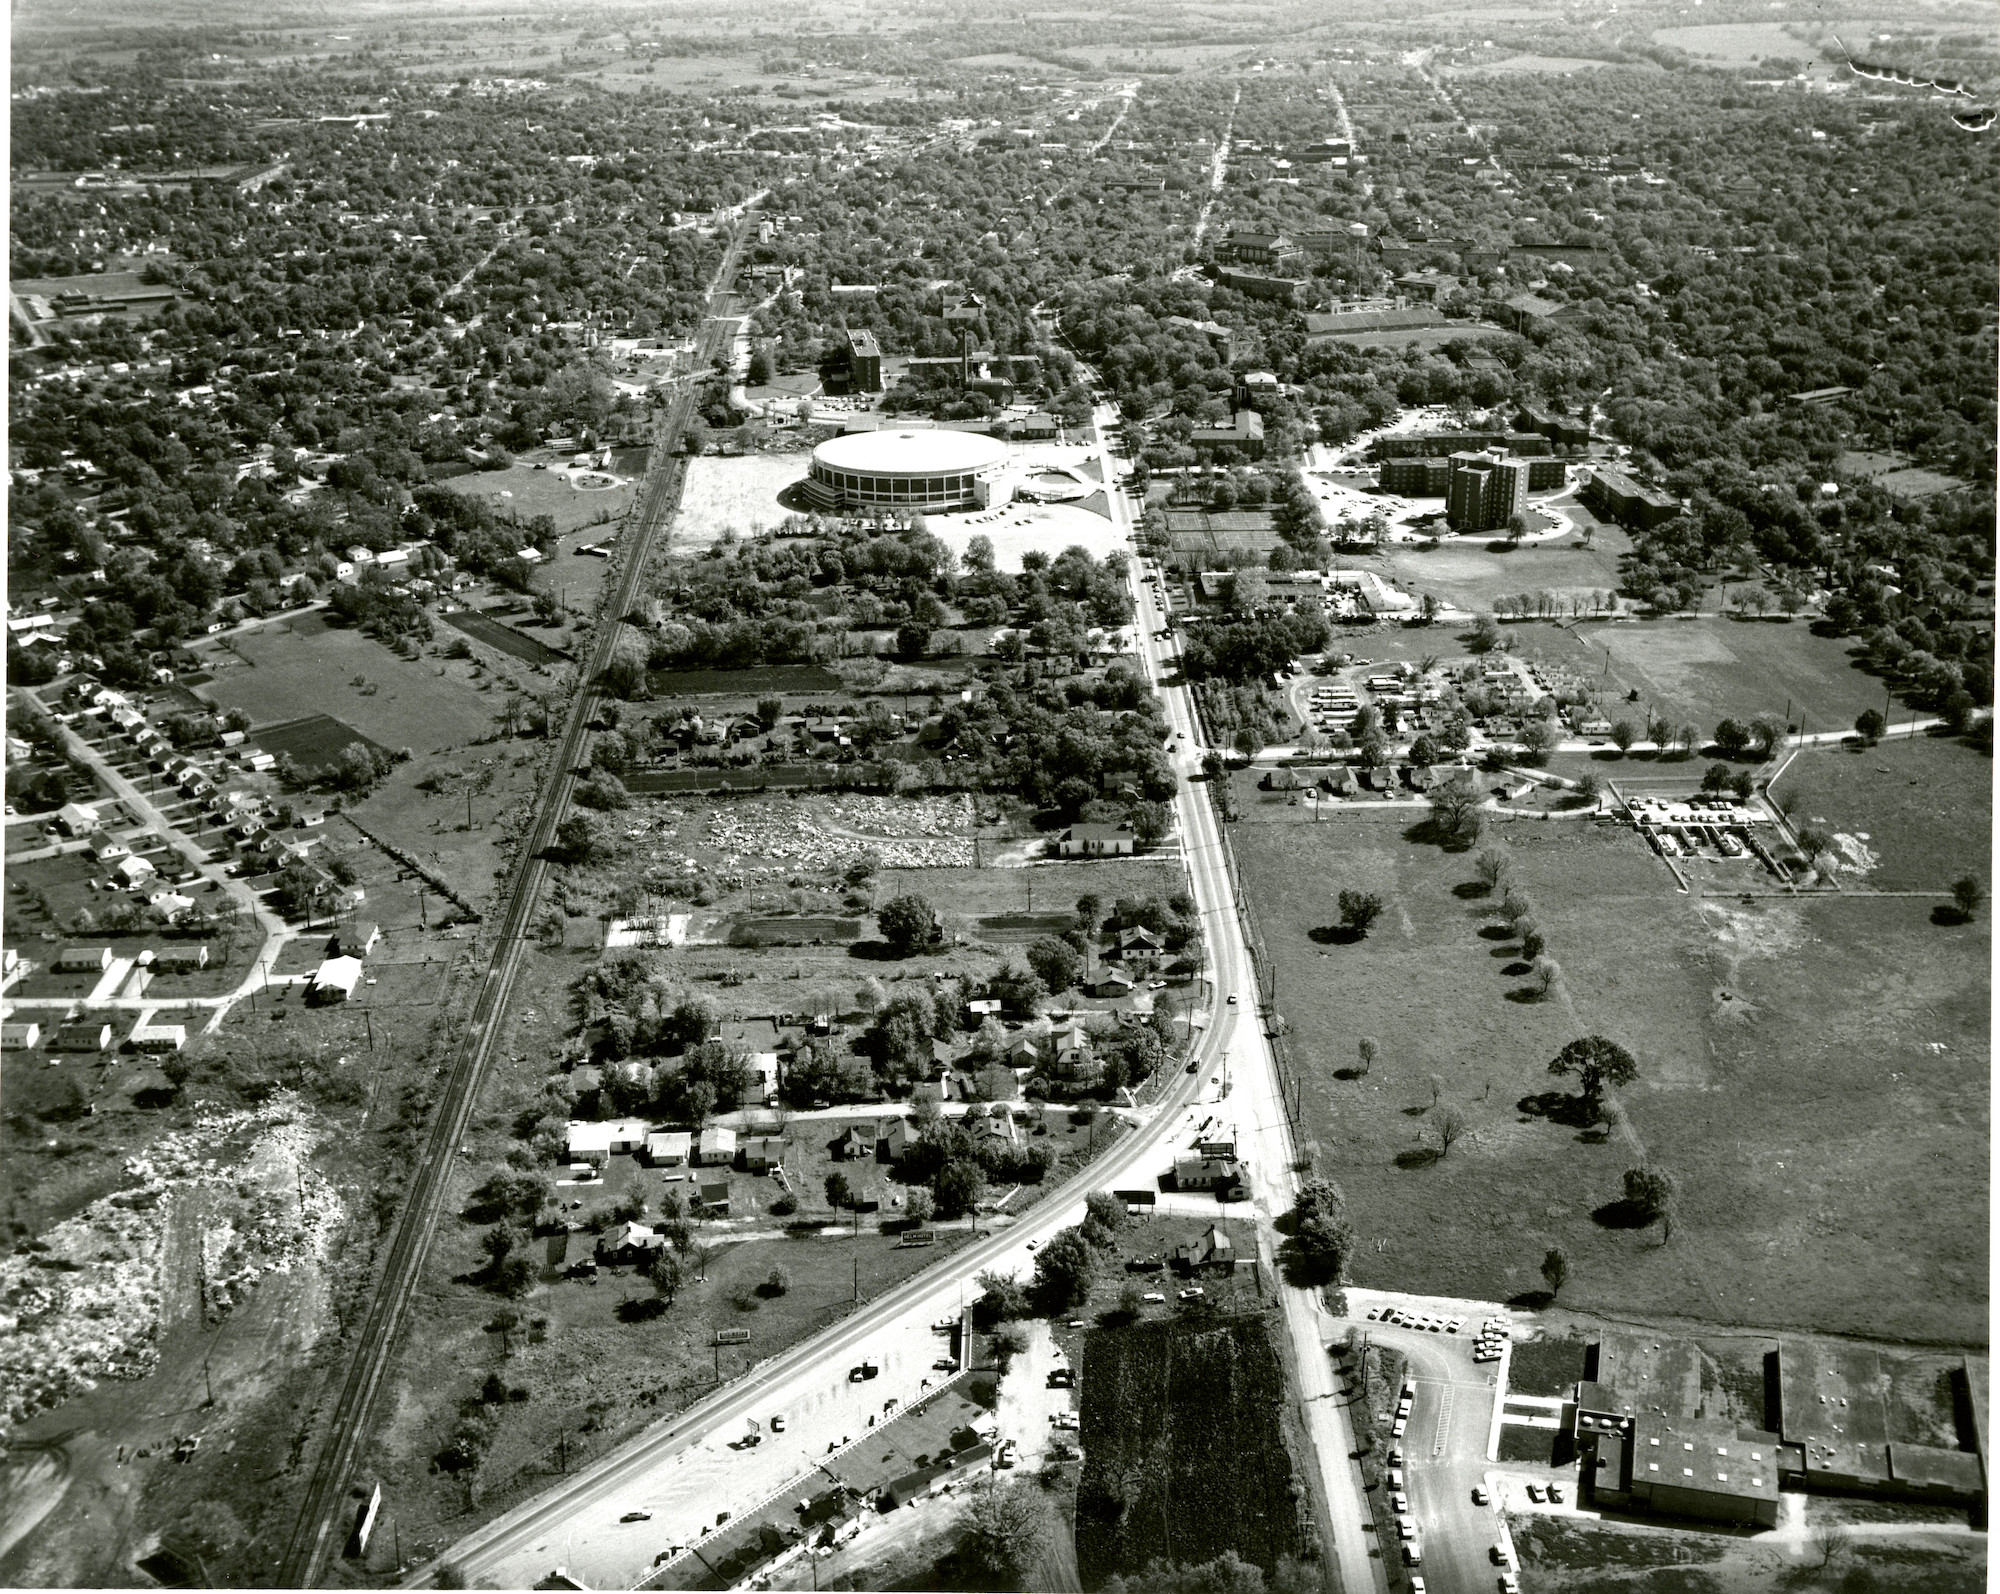 Diddle Arena and Jonesville, 1965